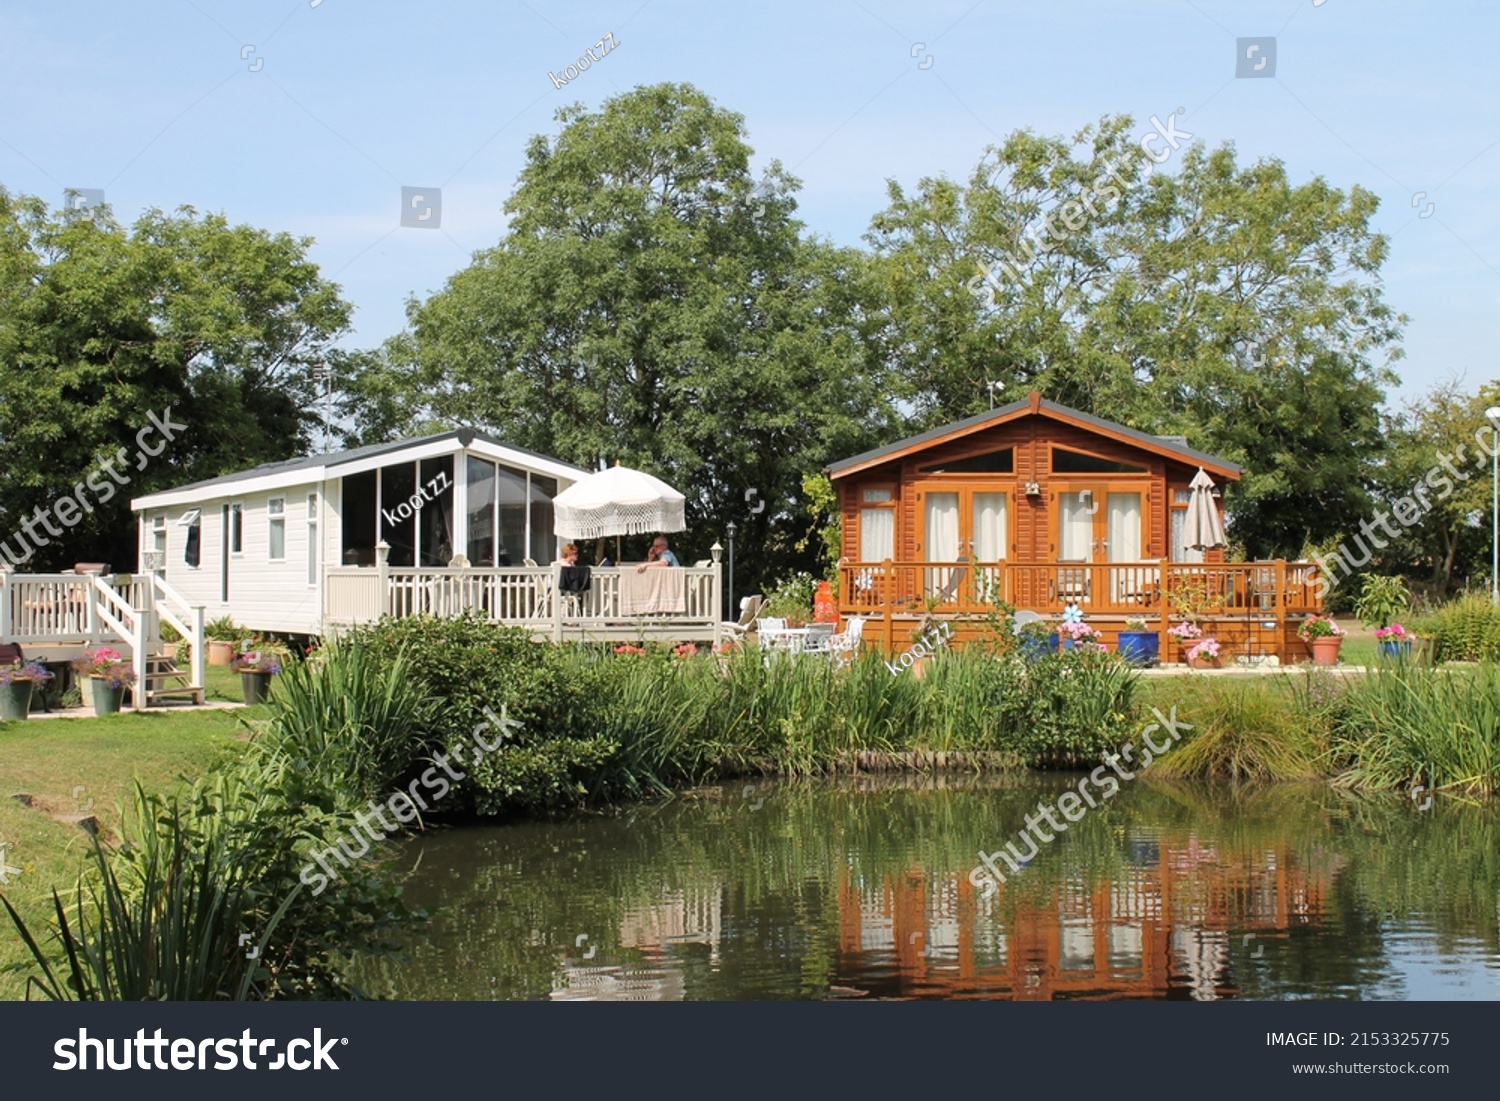 Static caravans and lodges on holiday parks #2153325775